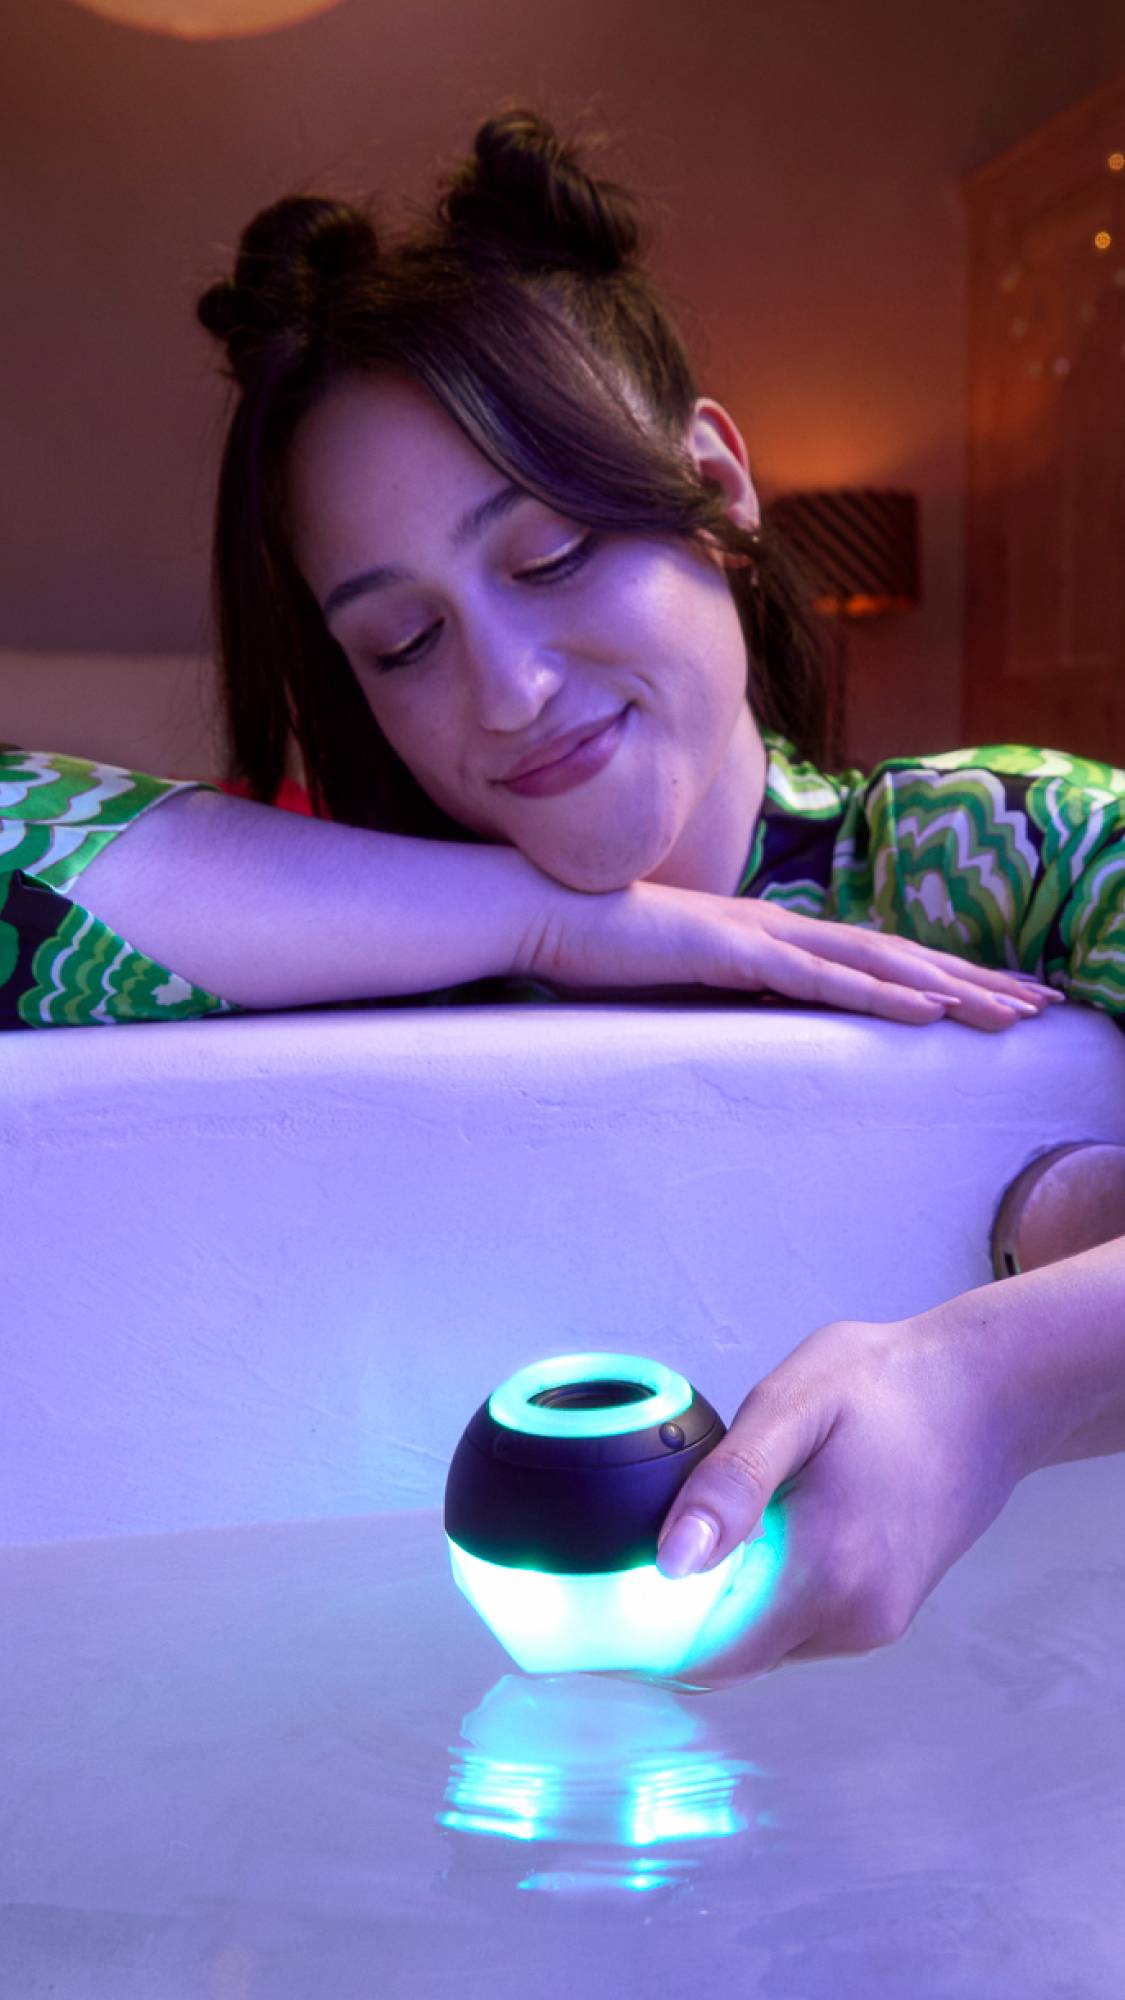 The model is sat over the bath with one hand lying on the side and the other holding the Bath Bot above the water. The Bath Bot is illuminated blue on the bottom half and around a small ring at the top. 